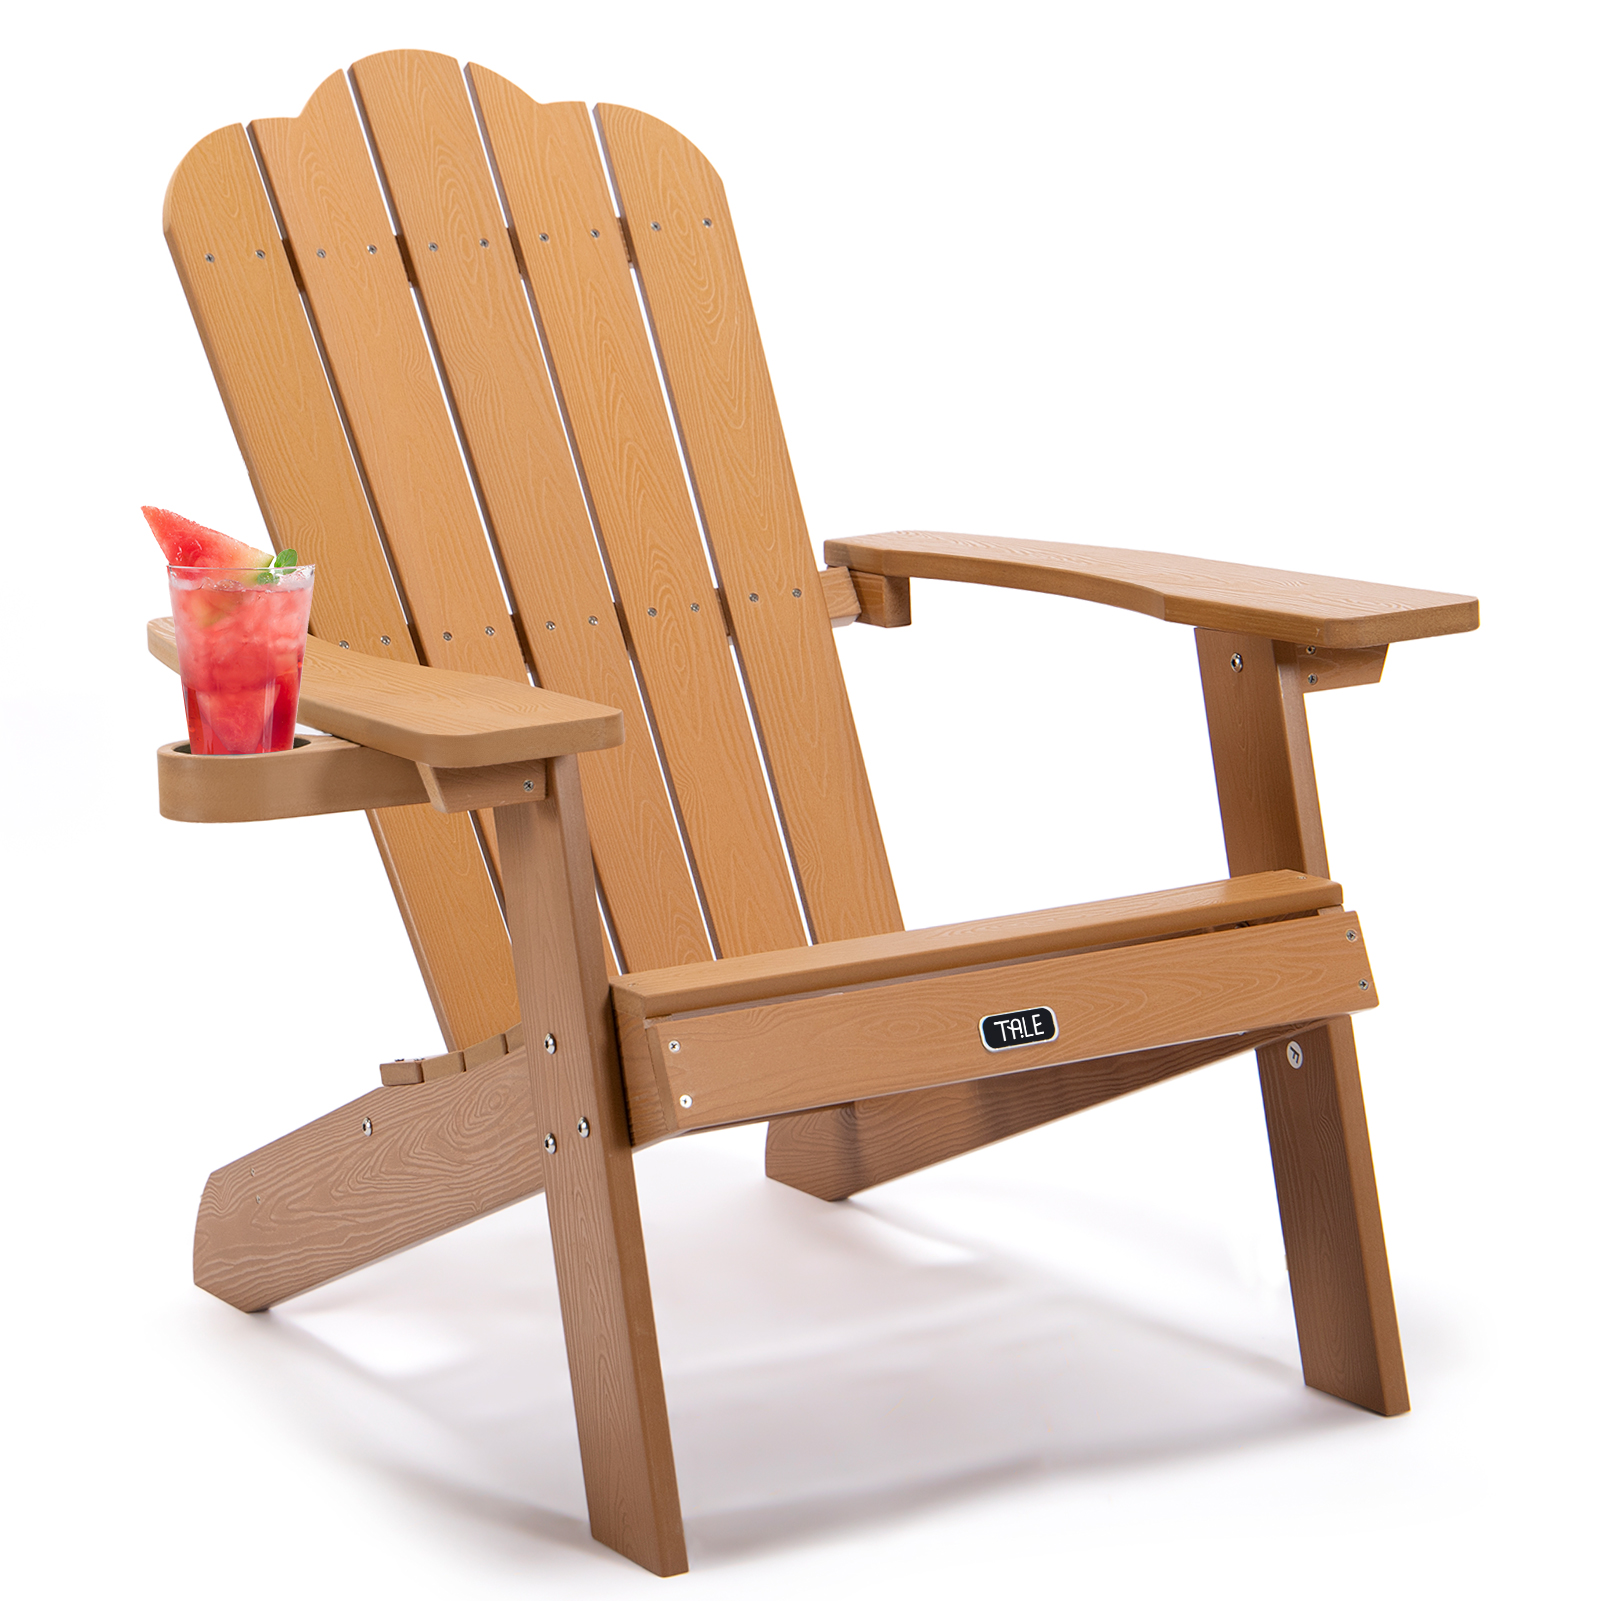 CoSoTower Adirondack Chair Backyard Outdoor Furniture Painted Seating with Cup Holder All-Weather and Fade-Resistant Plastic Wood for Lawn Patio Deck Garden Porch Lawn Furniture Chairs Brown - image 1 of 7